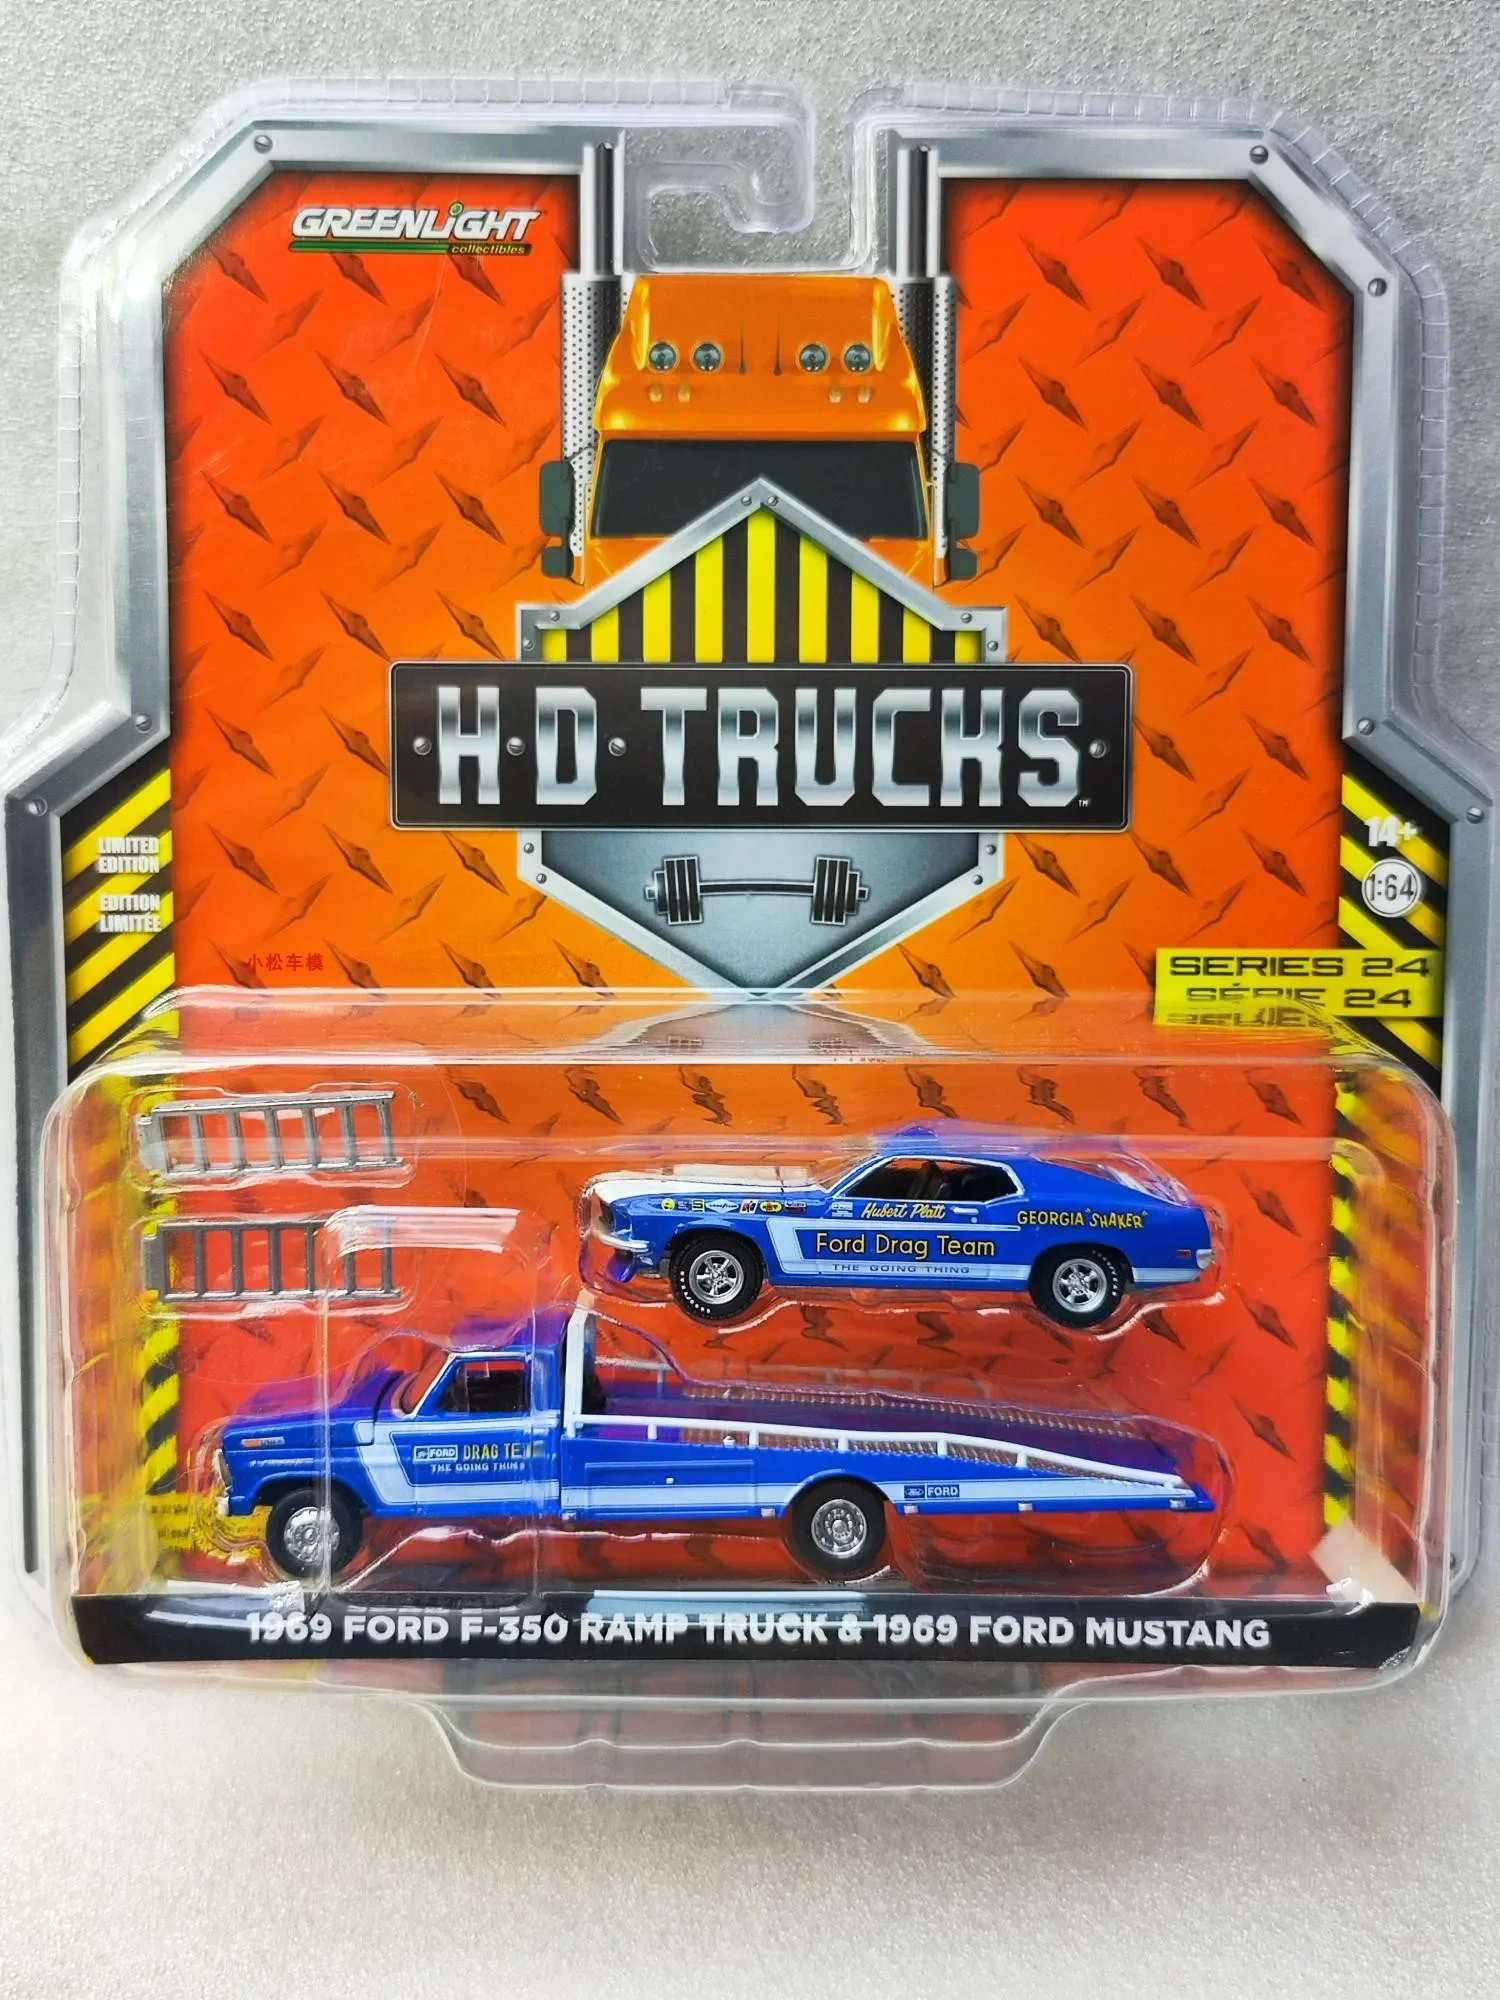 

1: 64 H.D. Truck Series 24 1969 Ford F-350 Ramp Truck&1969 Ford Mustang Collection Of Car Models